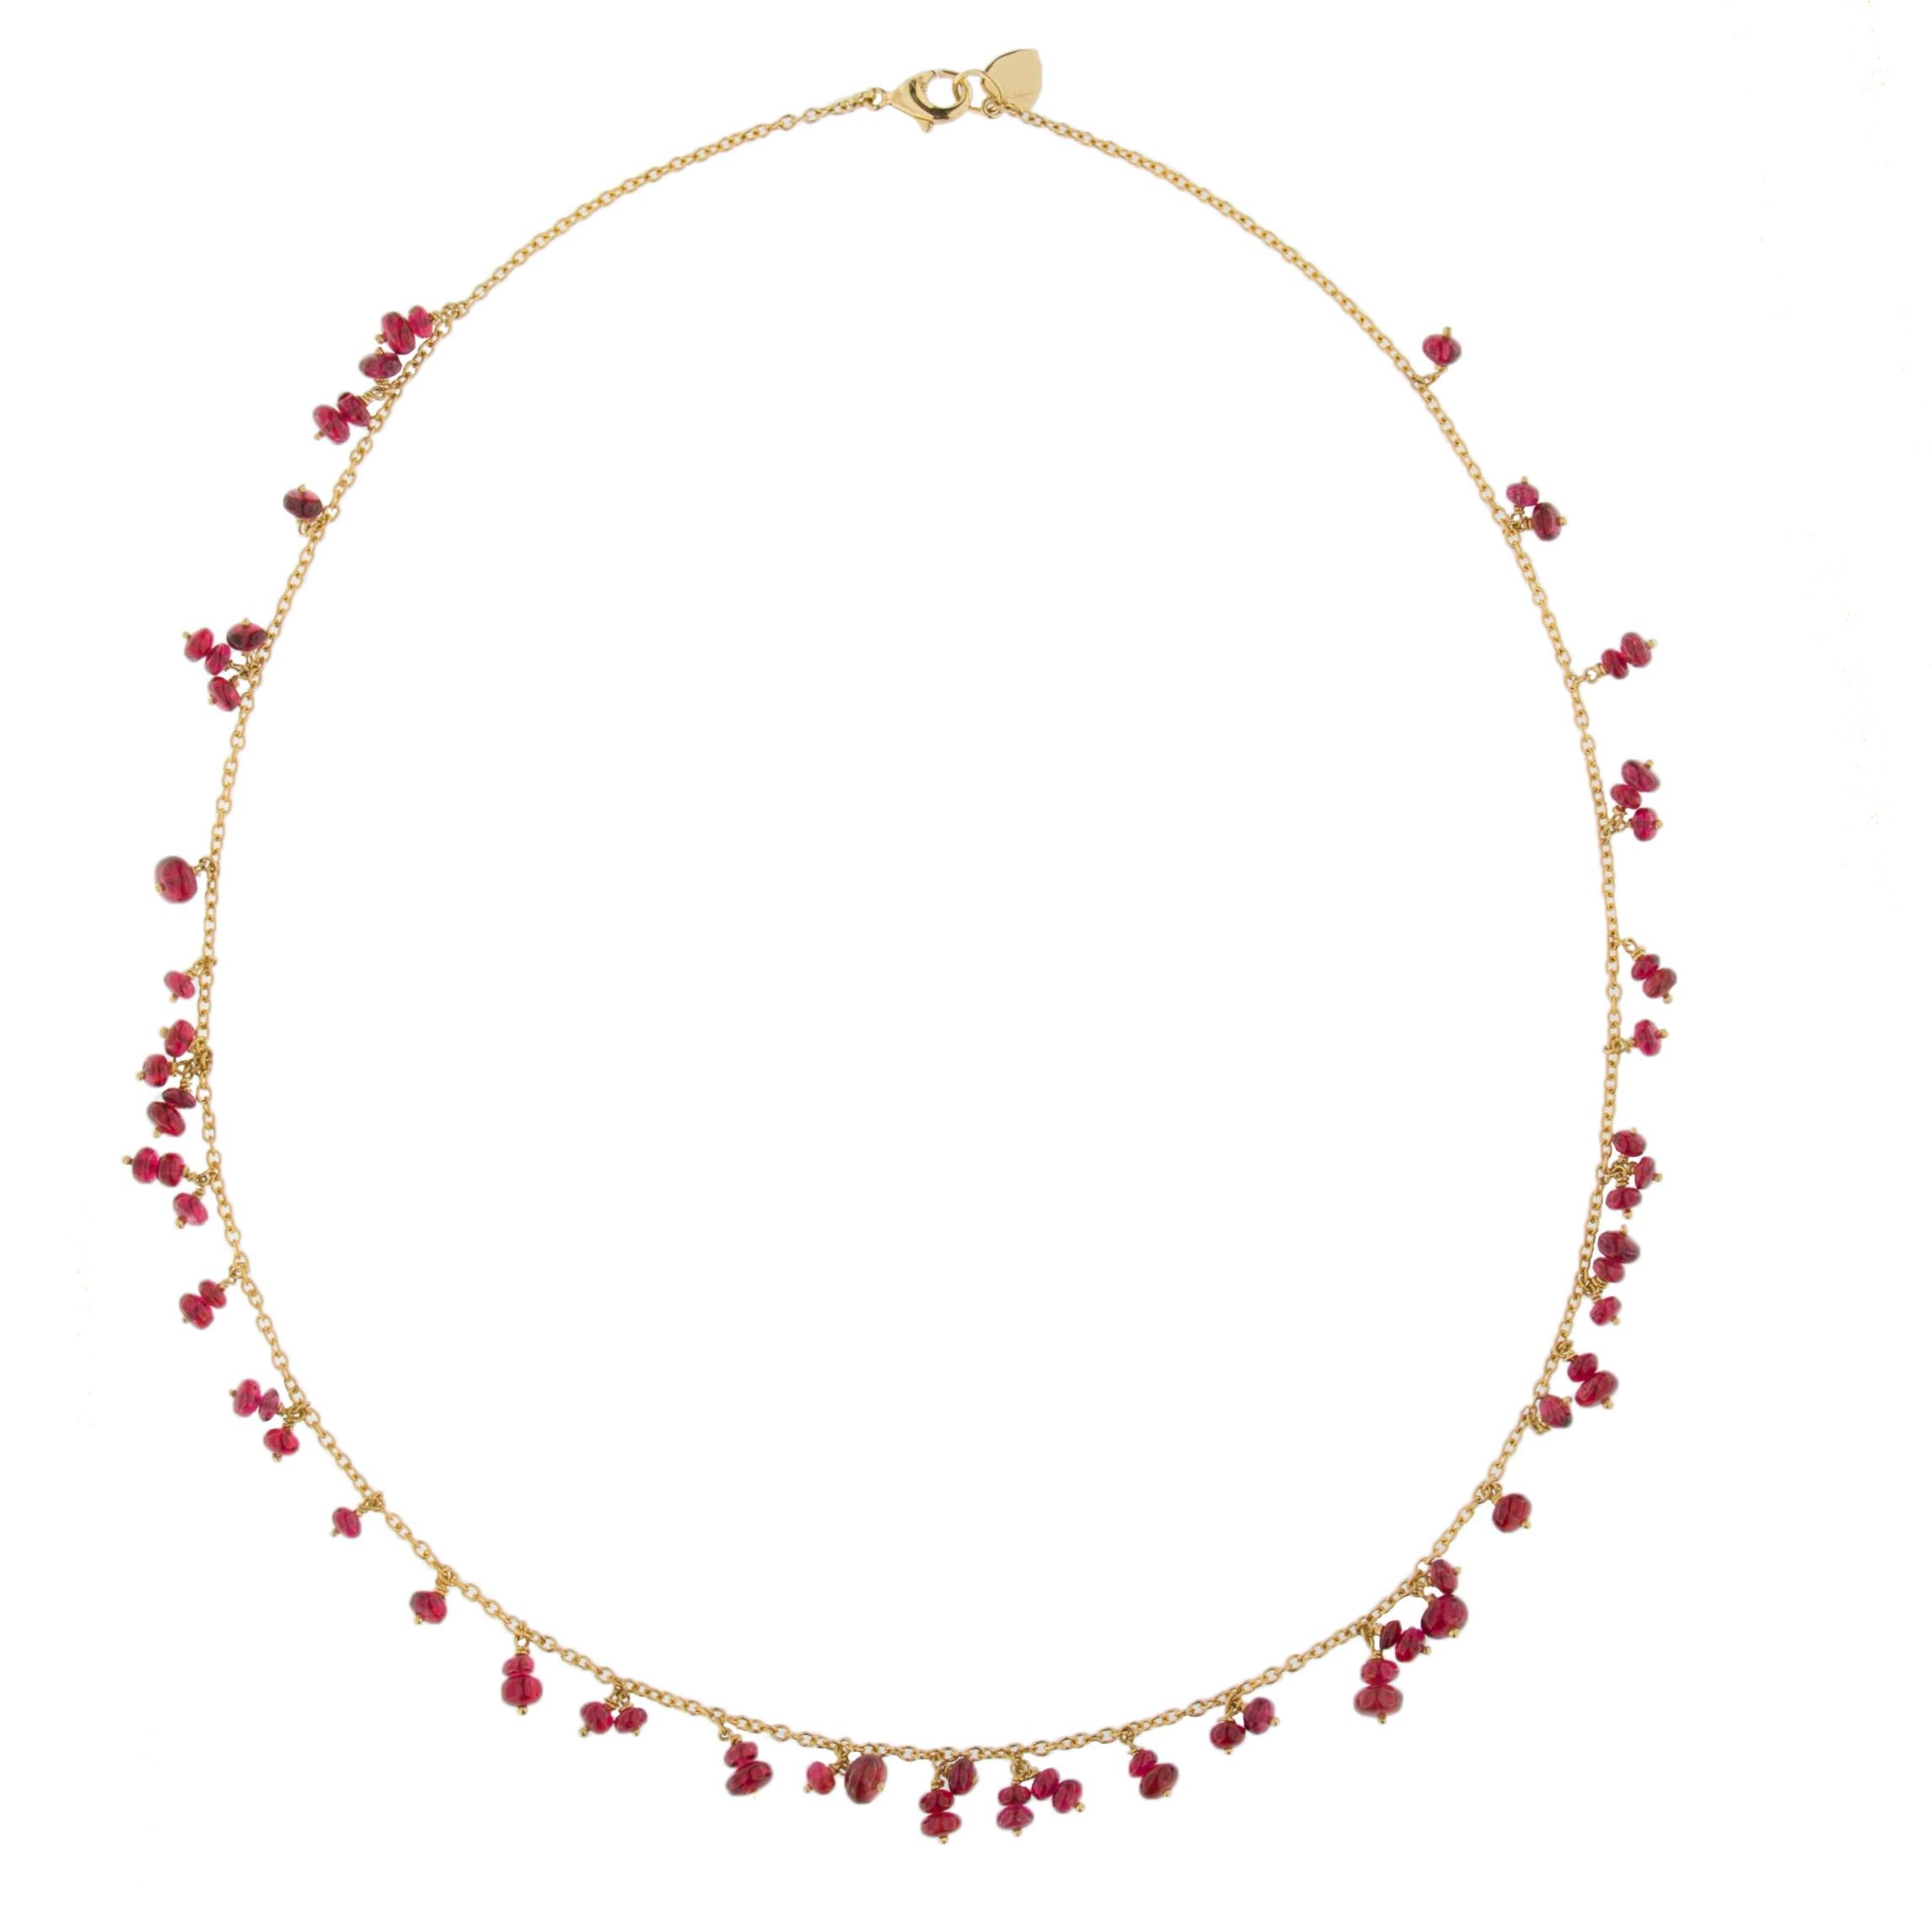 Jona design collection, hand crafted in Italy, 18 karat yellow gold chain necklace, featuring 22.10 carats of Burmese Red Spinels, cabochon beads.  
Dimension: L 17.71 in/ 45 cm X D 0.18 in/ 4,6 mm
All Jona jewelry is new and has never been